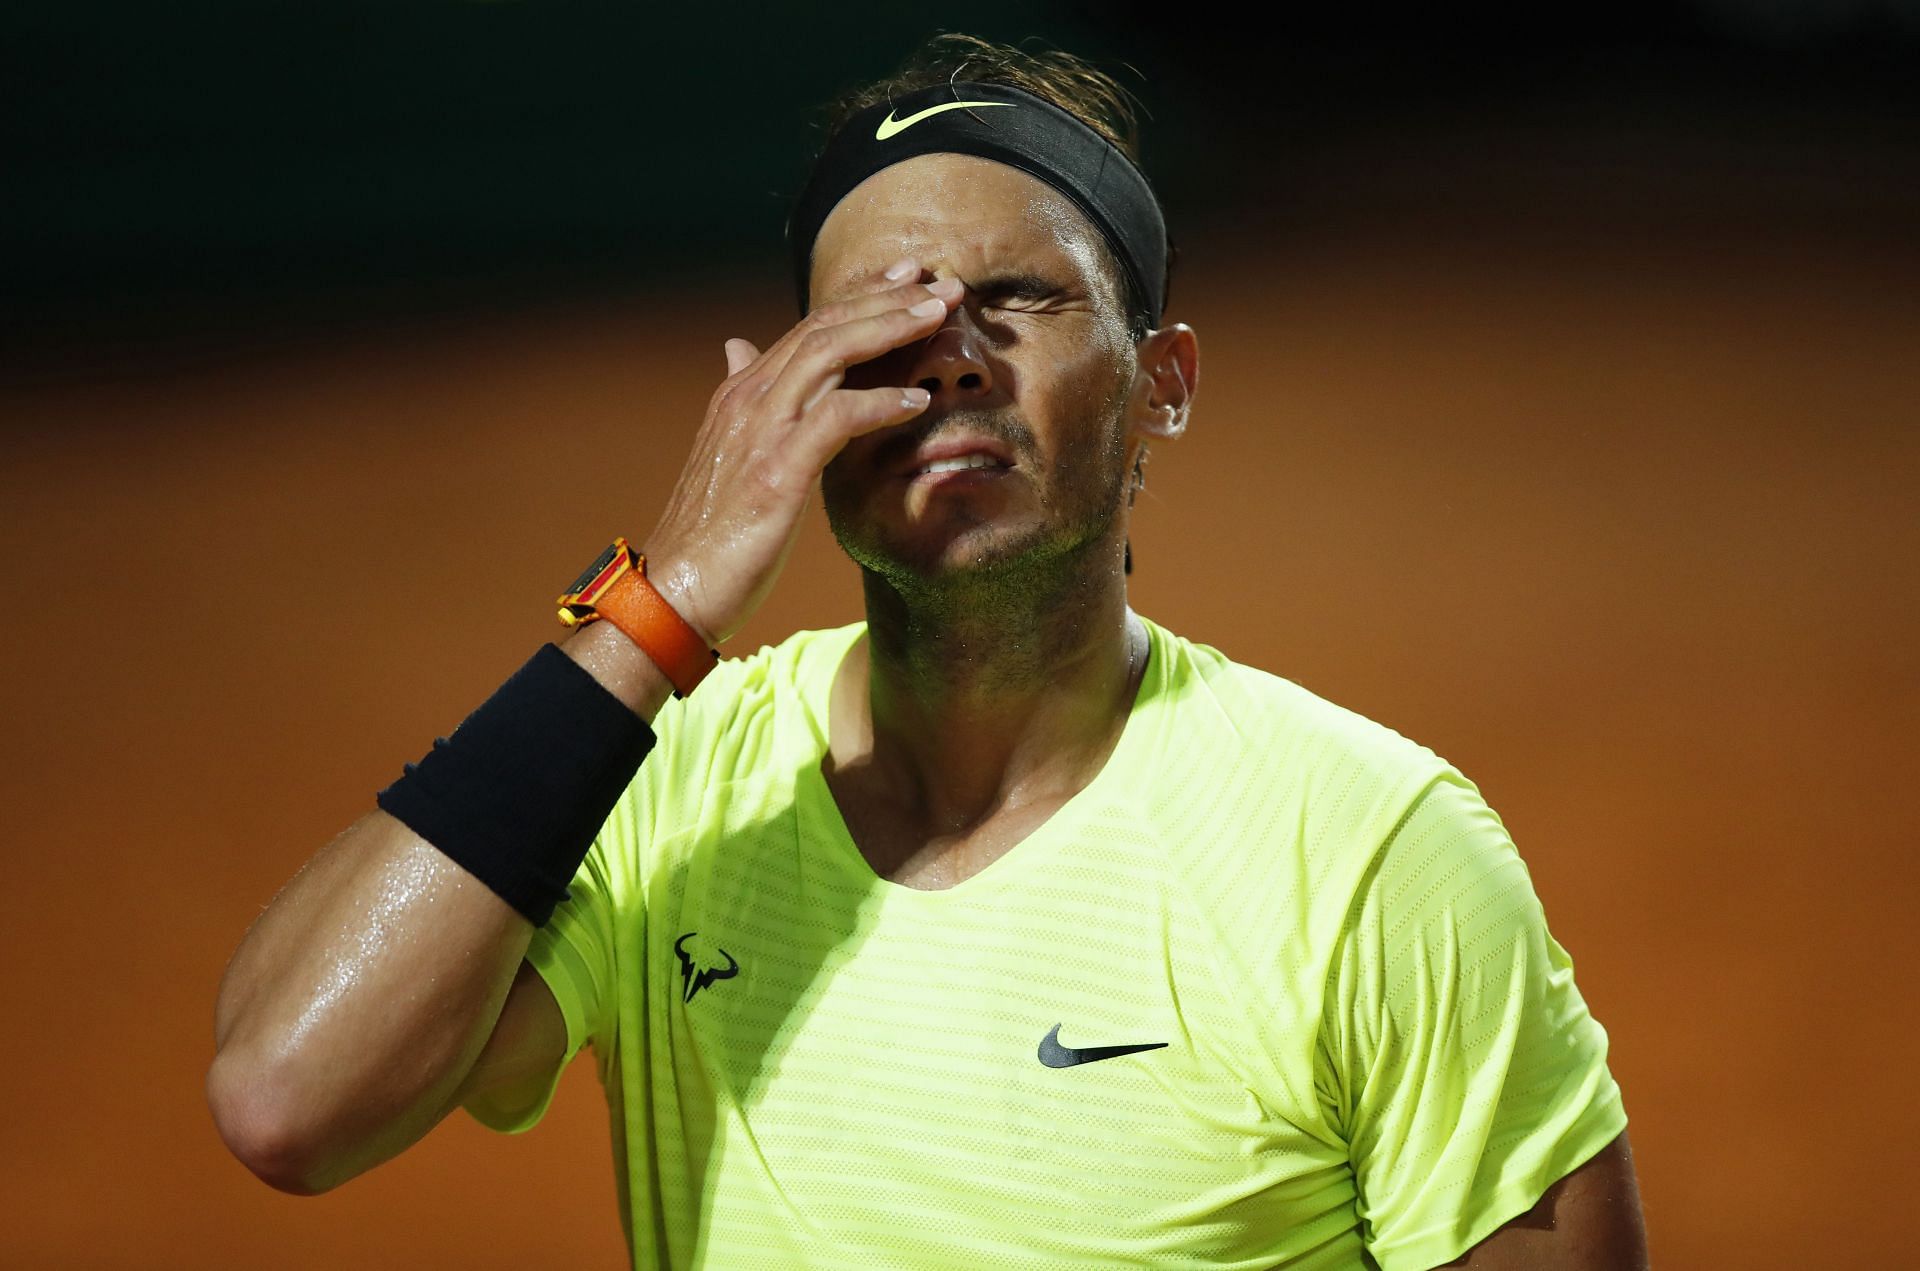 Nadal might miss out on the World No.1 ranking